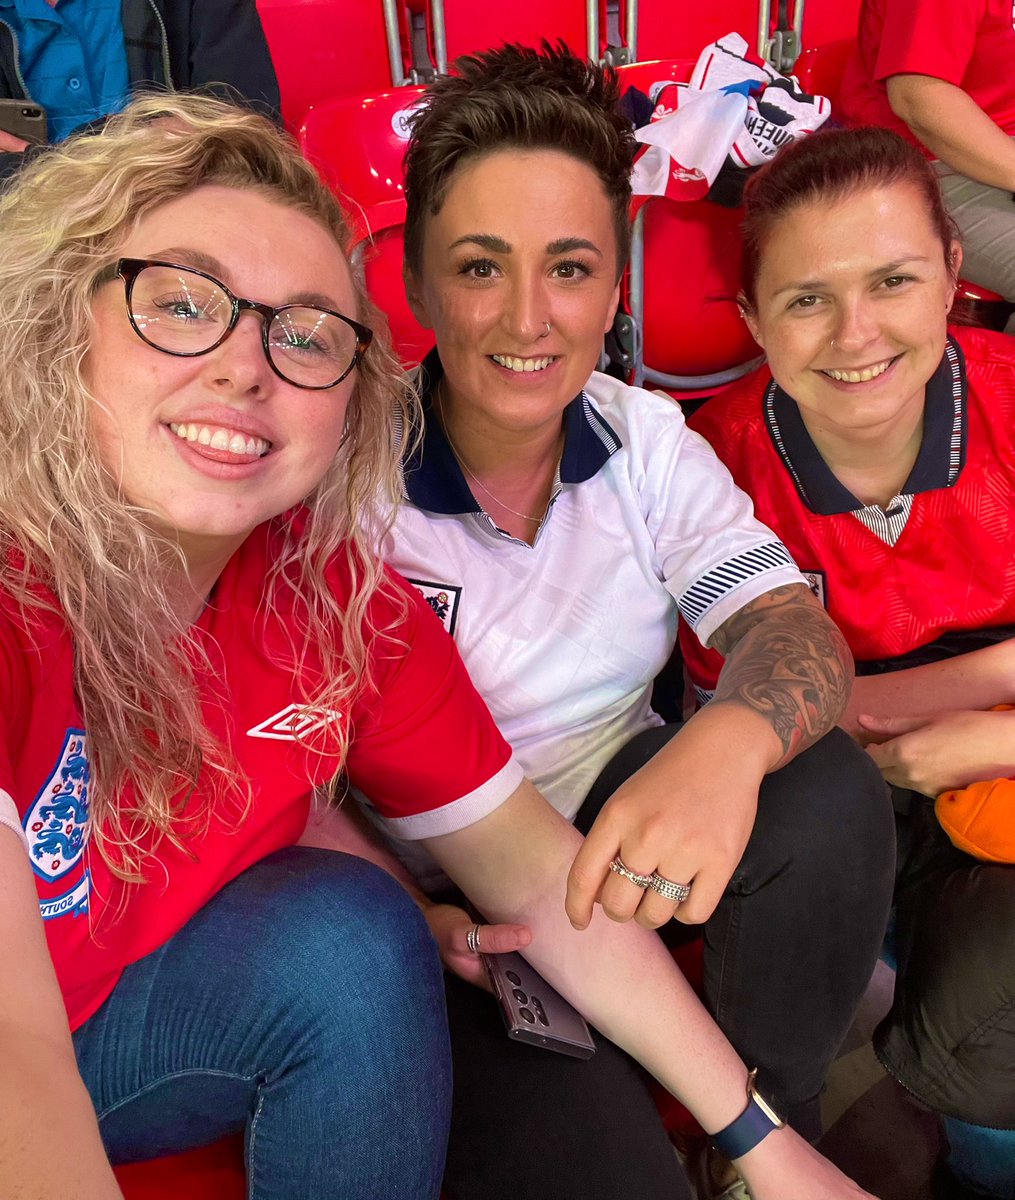 Great atmosphere and great game last night @Lionesses #worldcup2023 #WSL #englandwomen